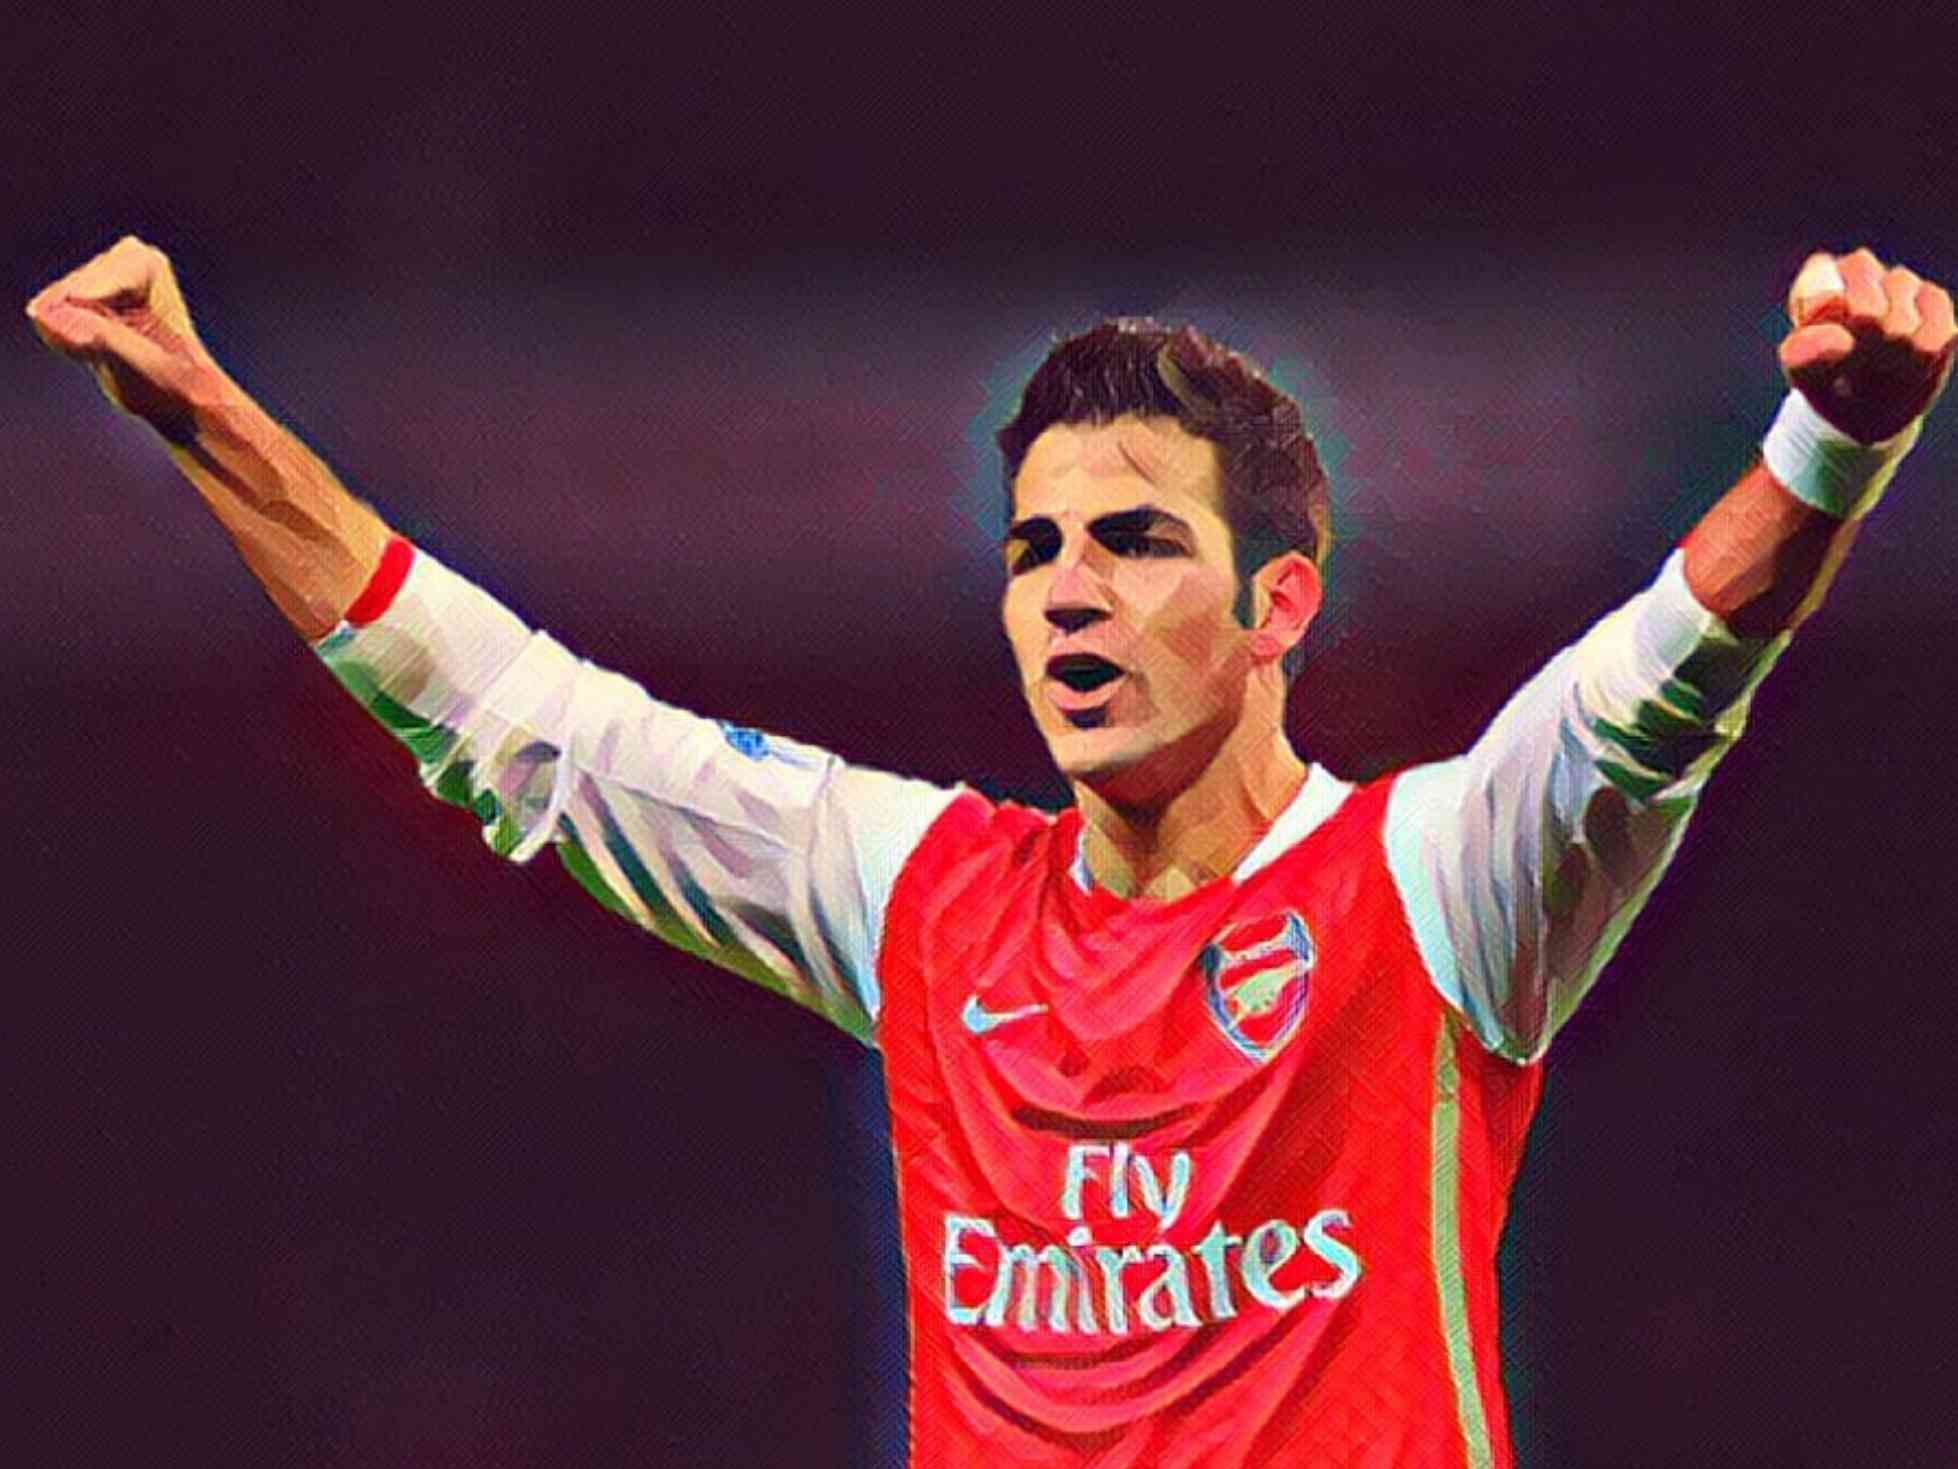 Why Cesc Fabregas is forgiven by Arsenal fans while RVP and Ashley Cole are villains